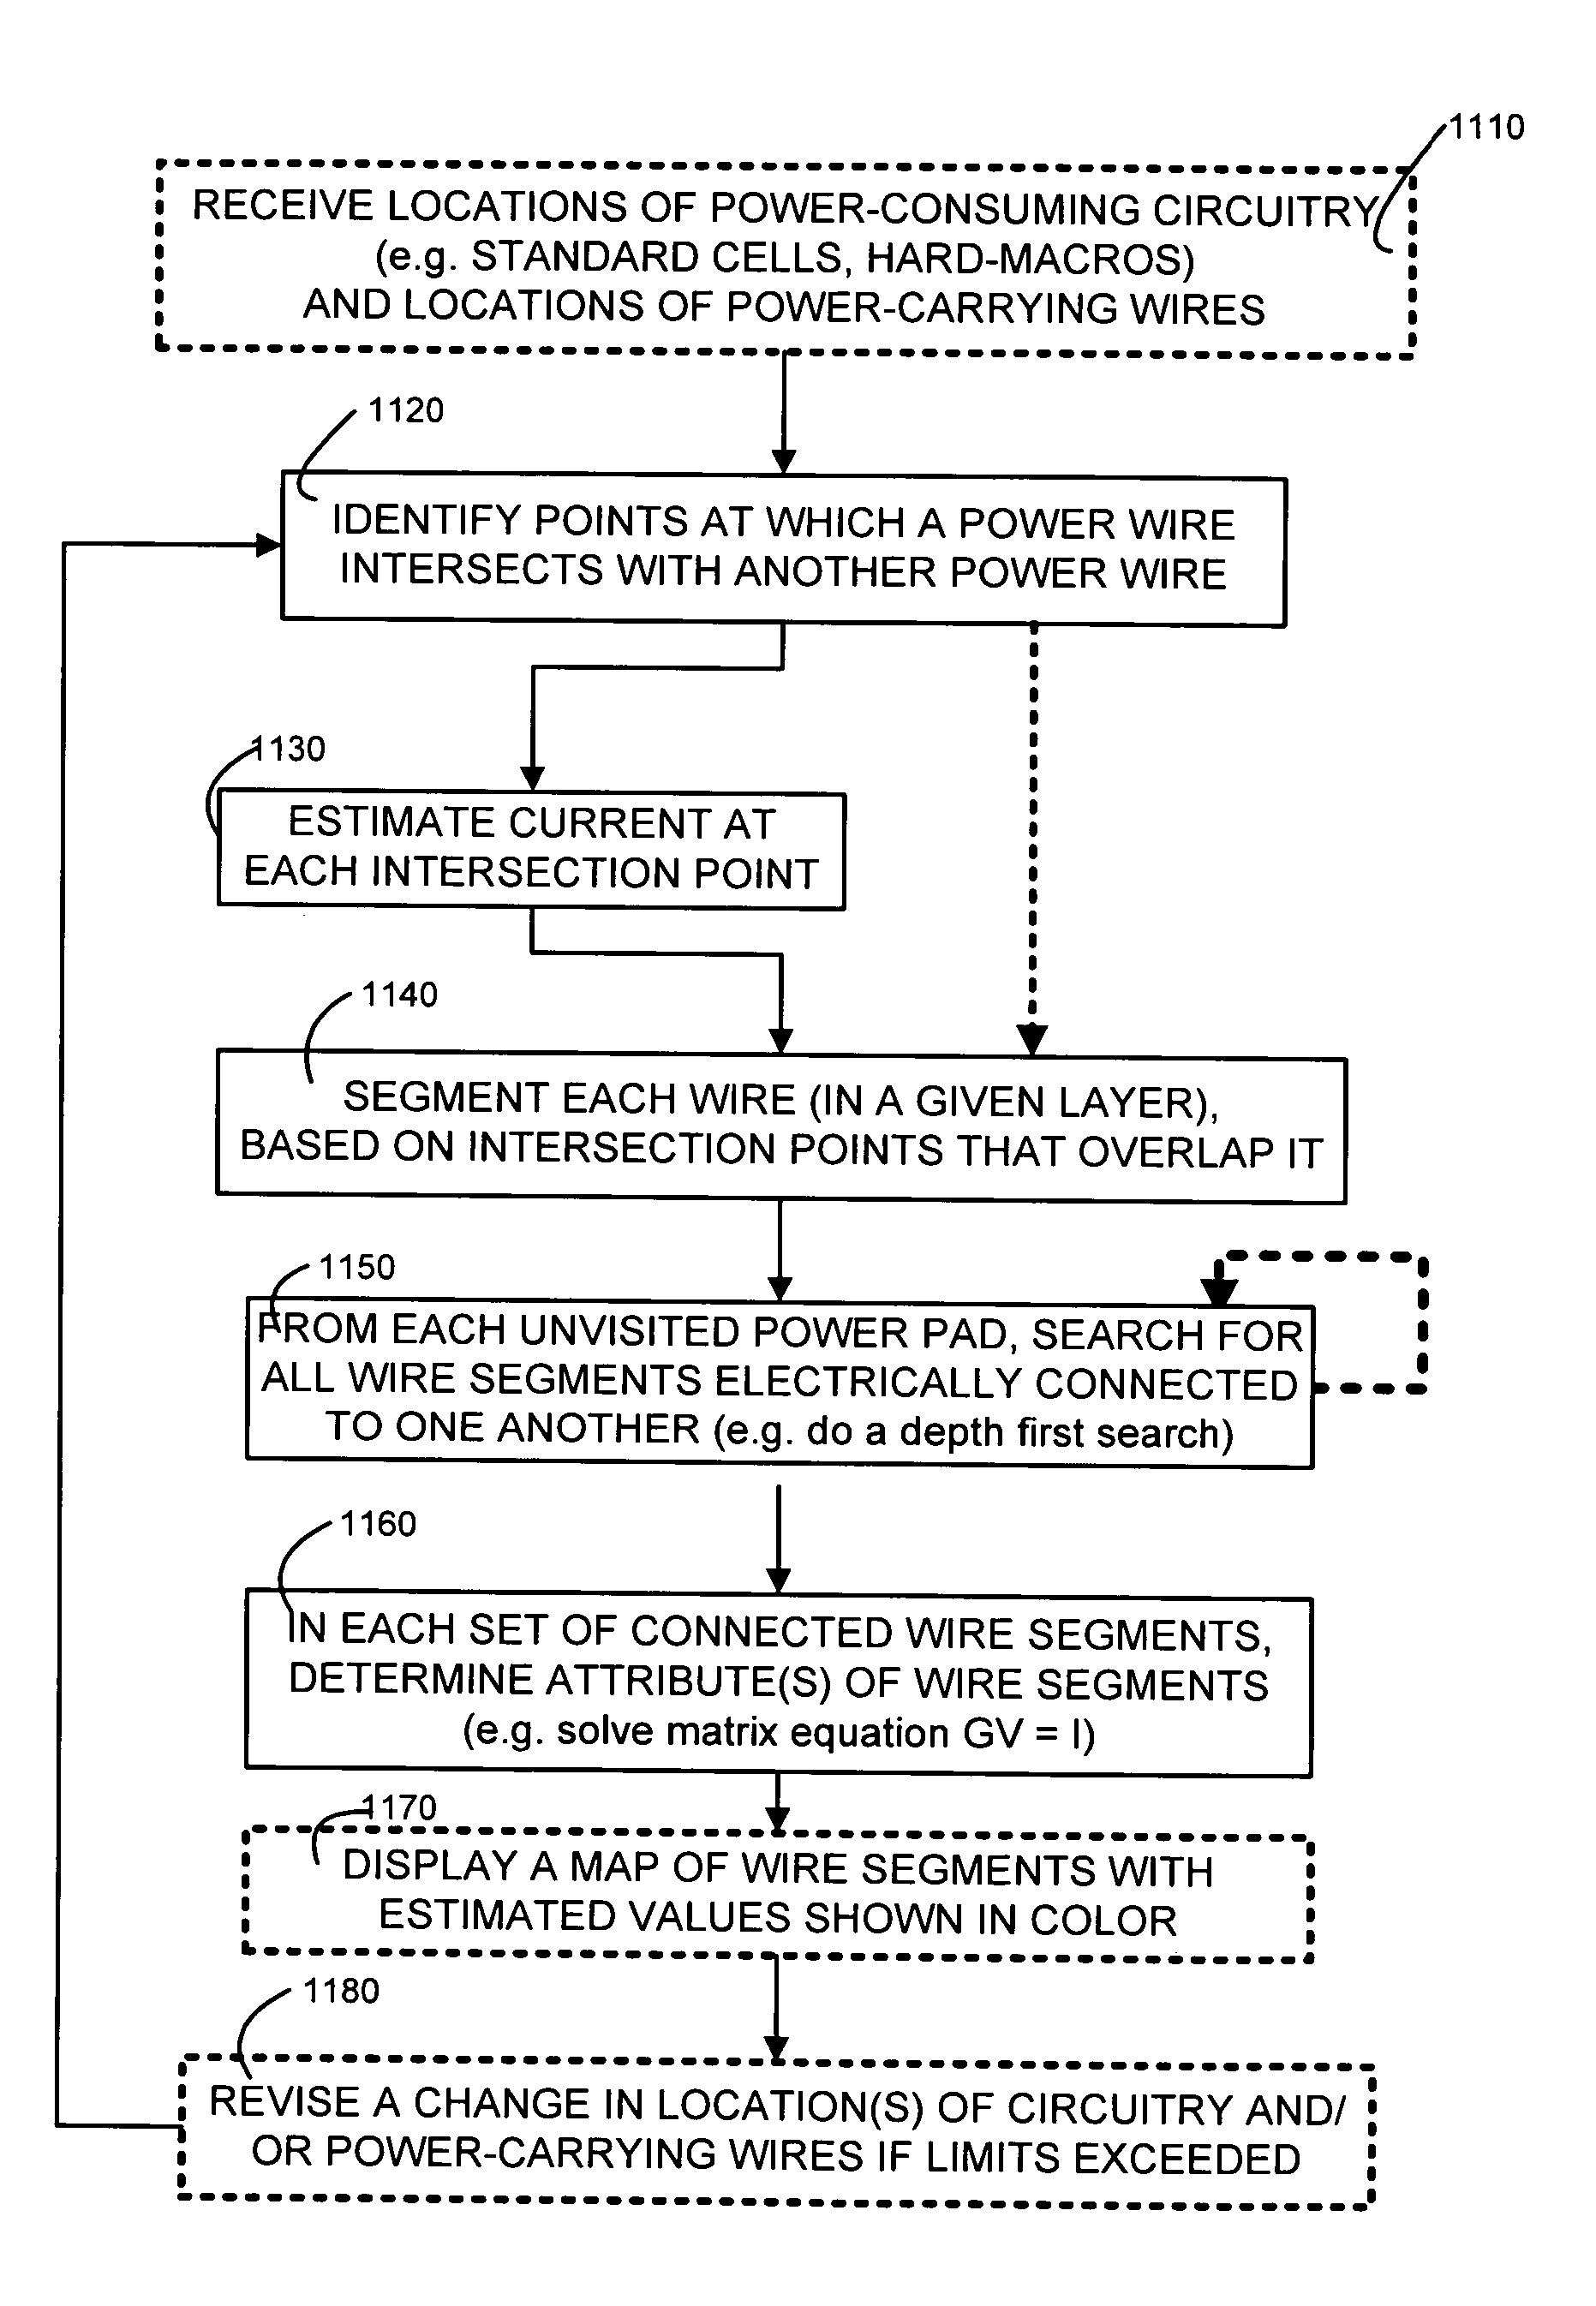 Power network analyzer for an integrated circuit design